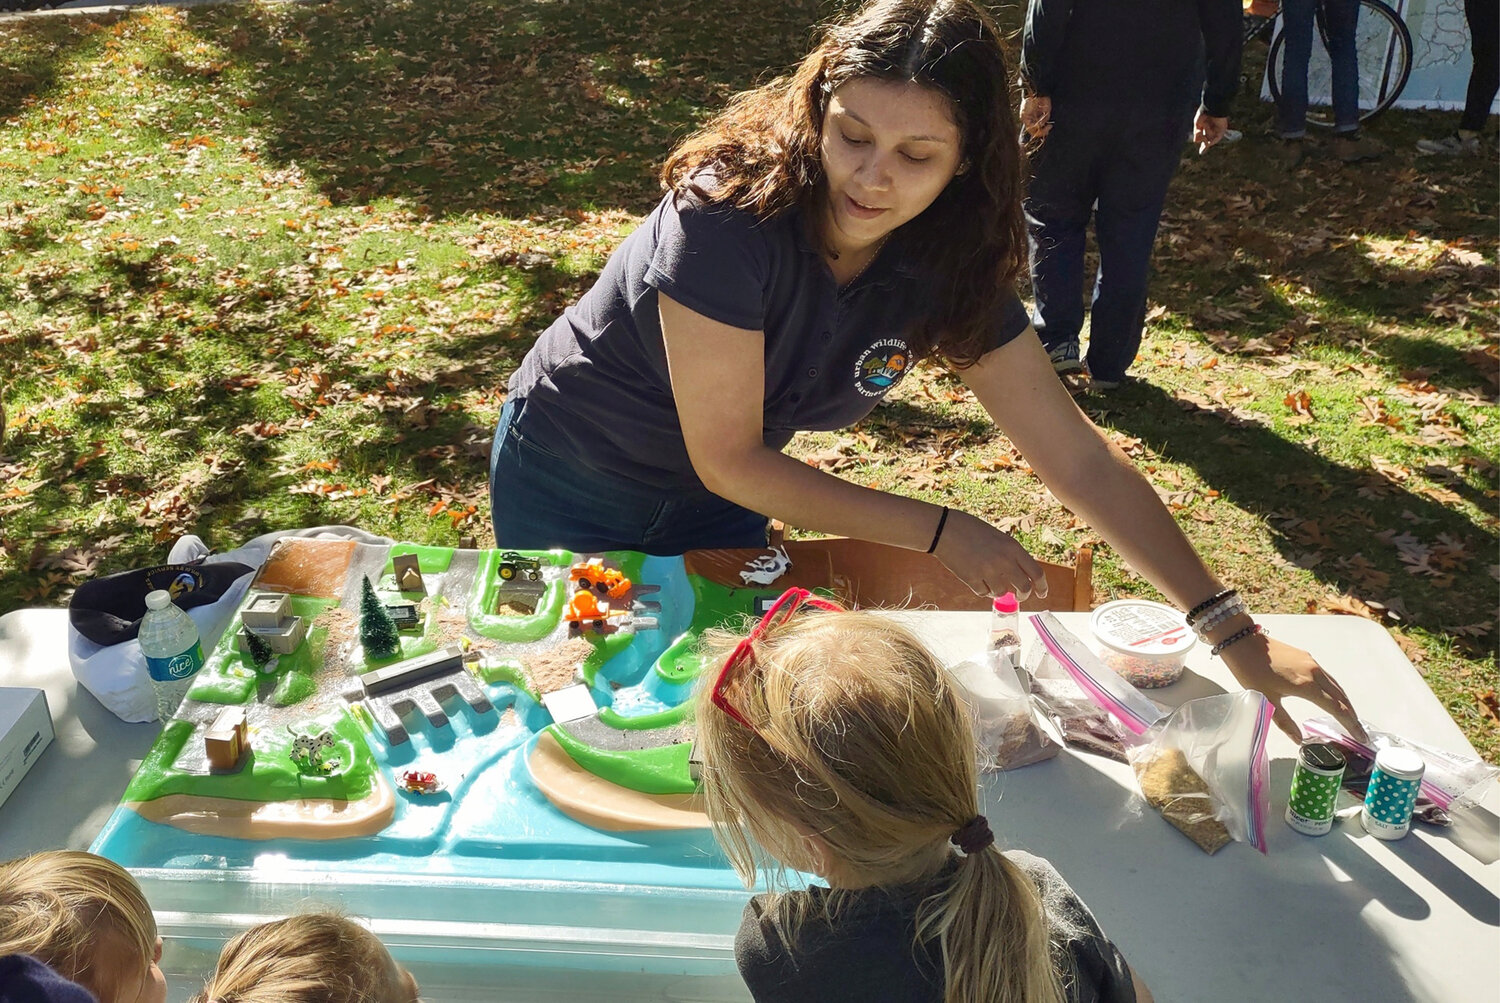 Families learn about stormwater through a watershed model at the Rain Harvest Festival